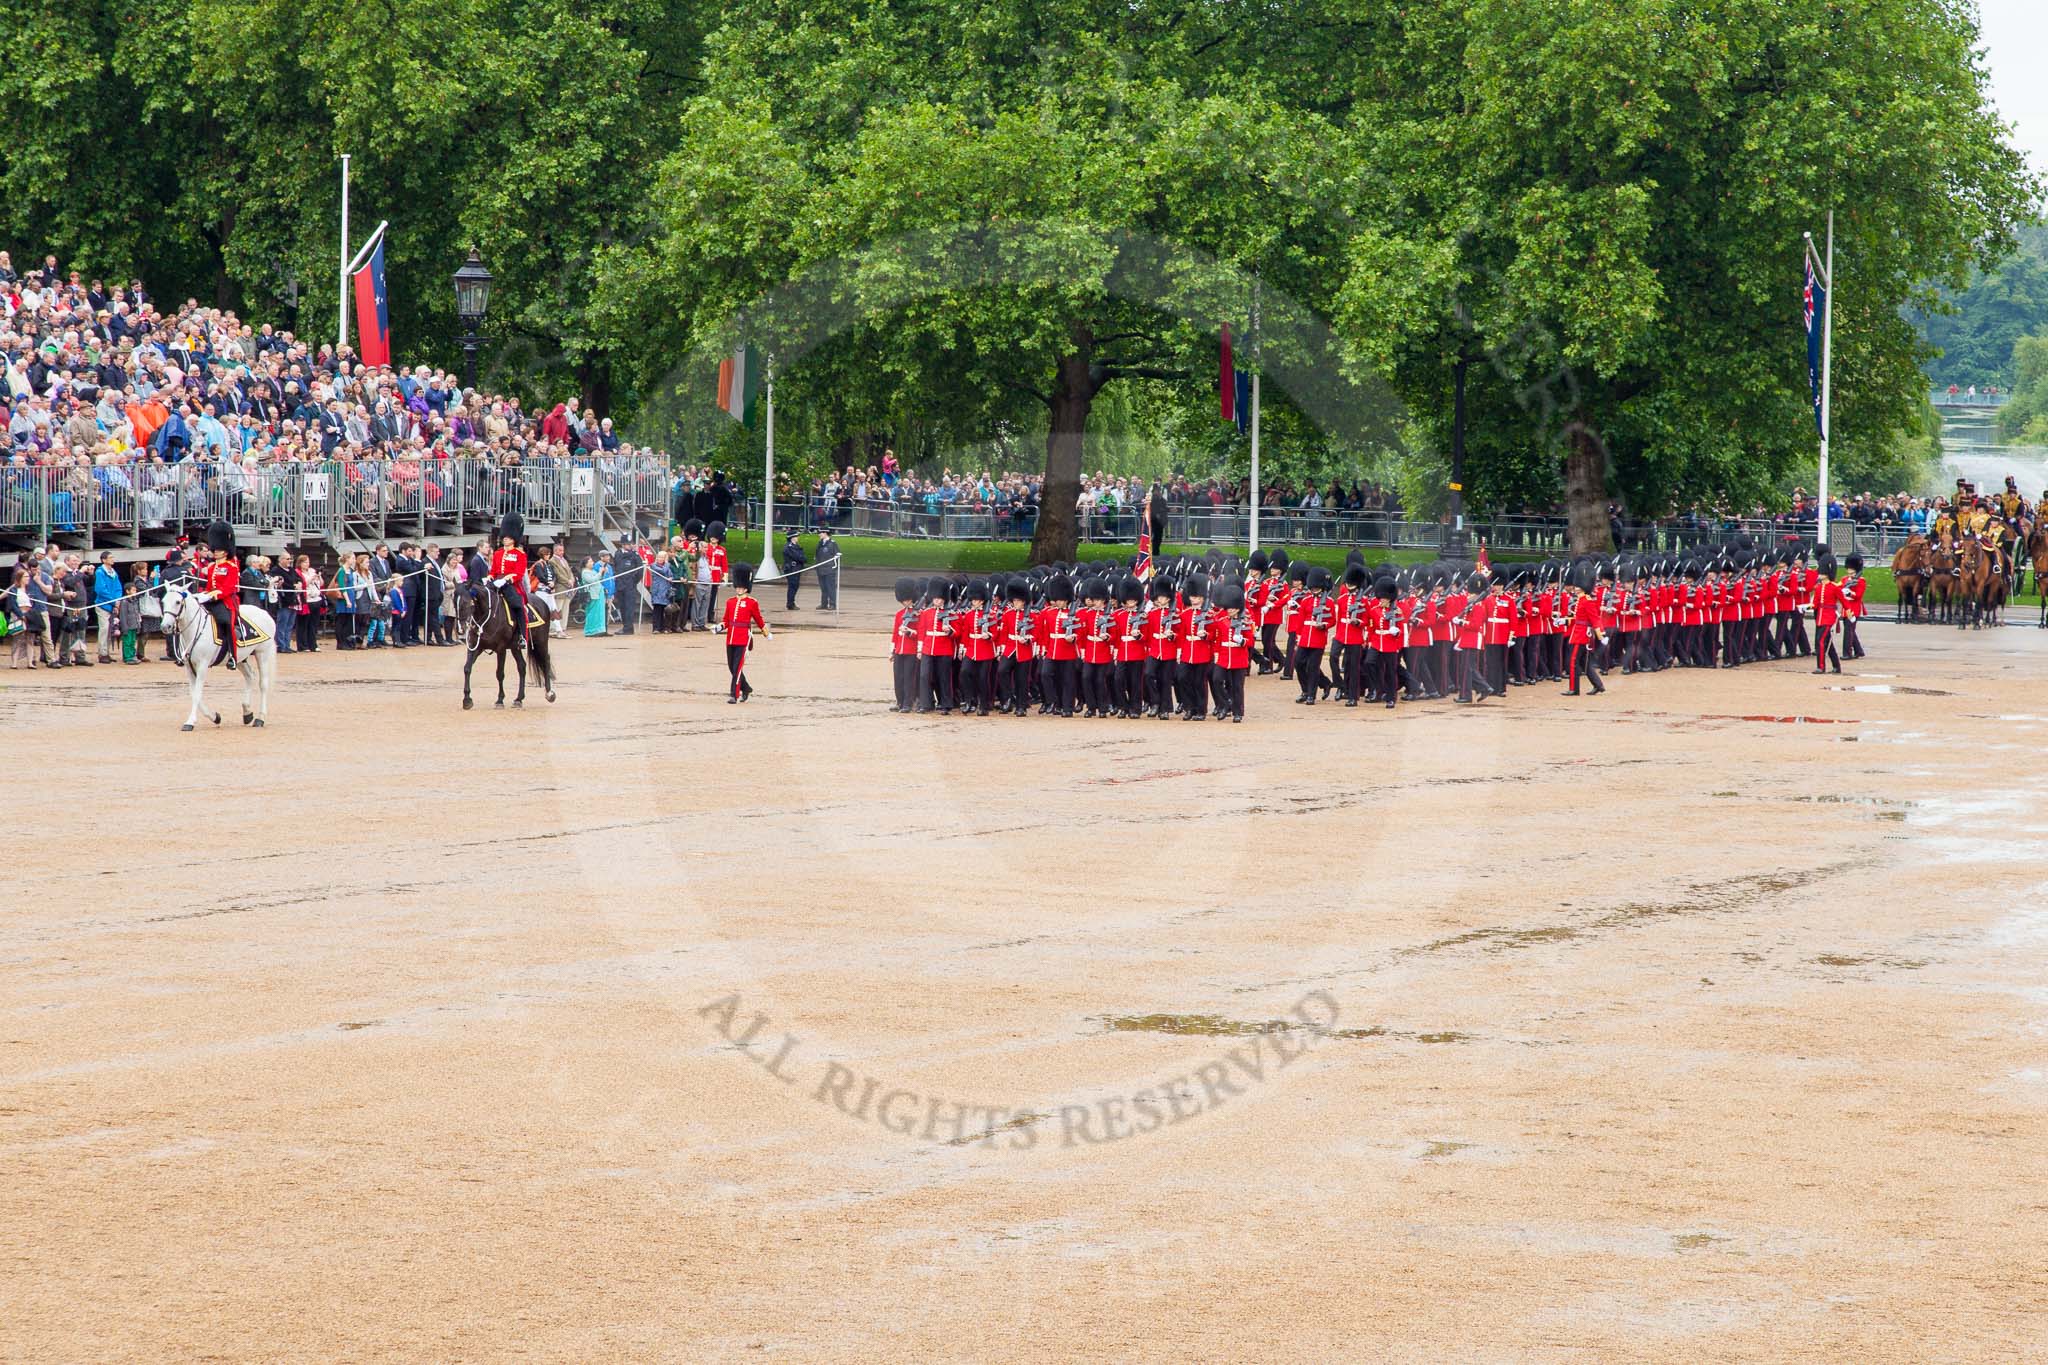 The Colonel's Review 2014.
Horse Guards Parade, Westminster,
London,

United Kingdom,
on 07 June 2014 at 11:42, image #538